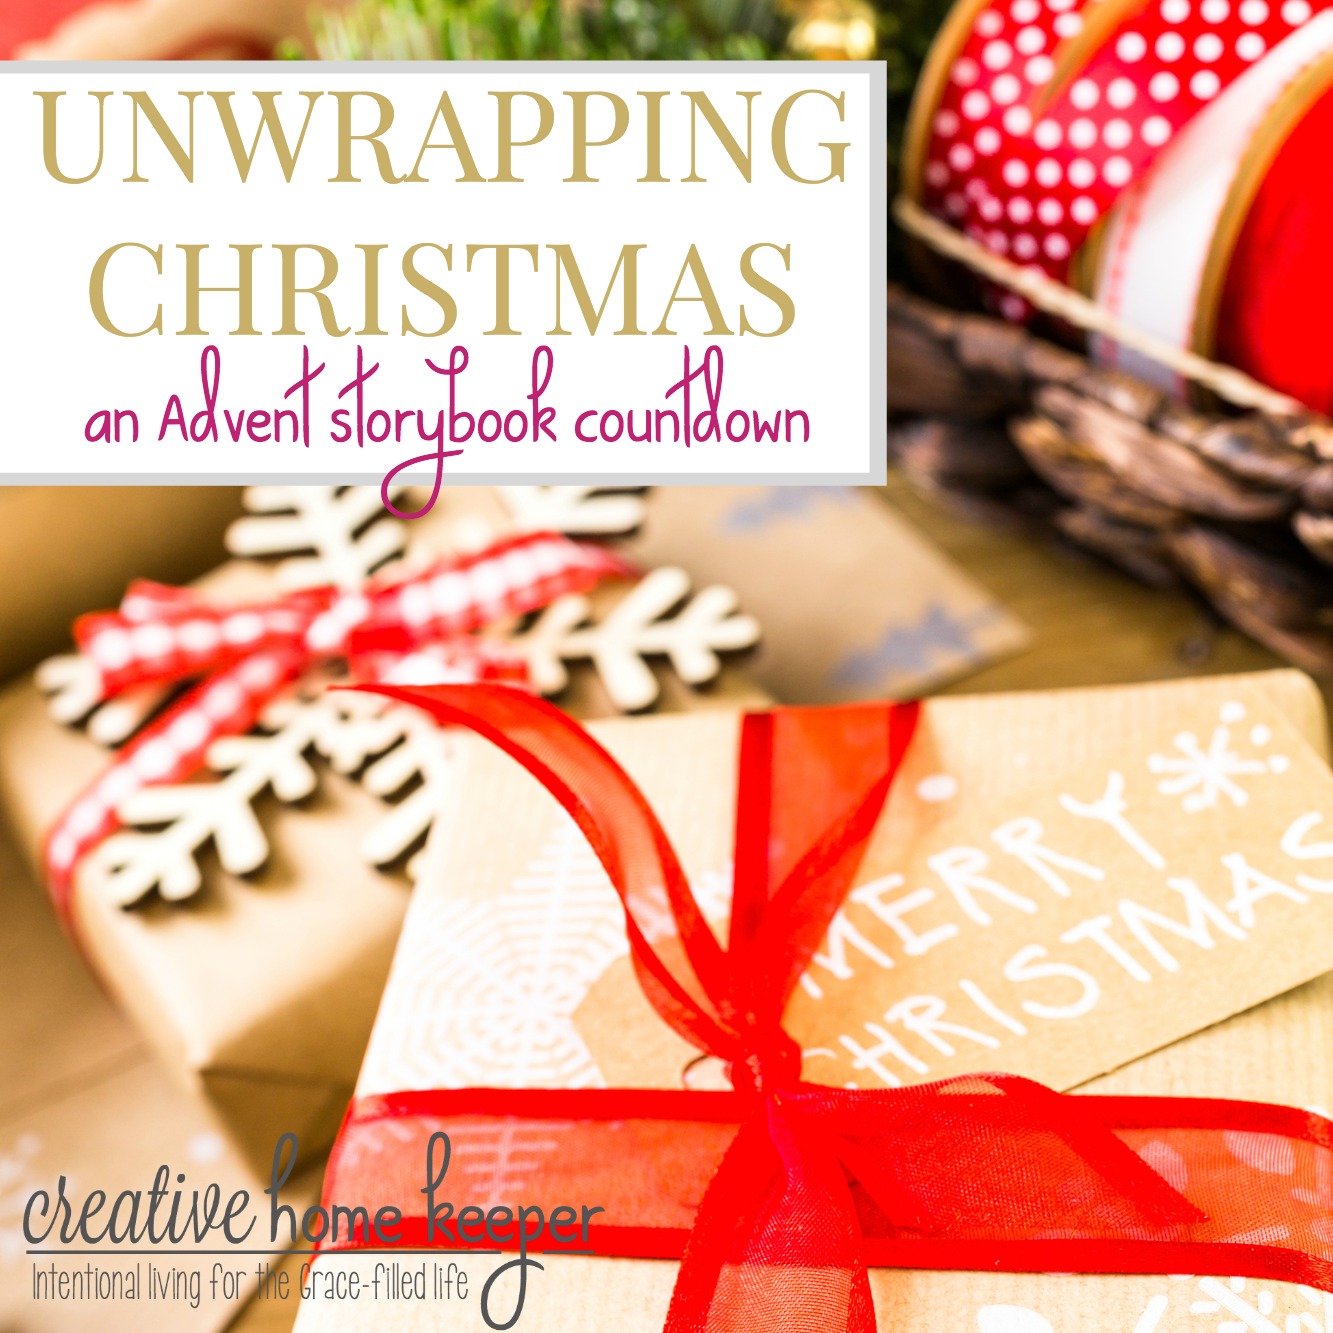 Build memories and teach your children the true meaning of Christmas with this fun Advent storybook countdown collection of books the whole family will love. 24 books that both focus on Christ's birth but also a few the include the fun traditions of the holiday season.